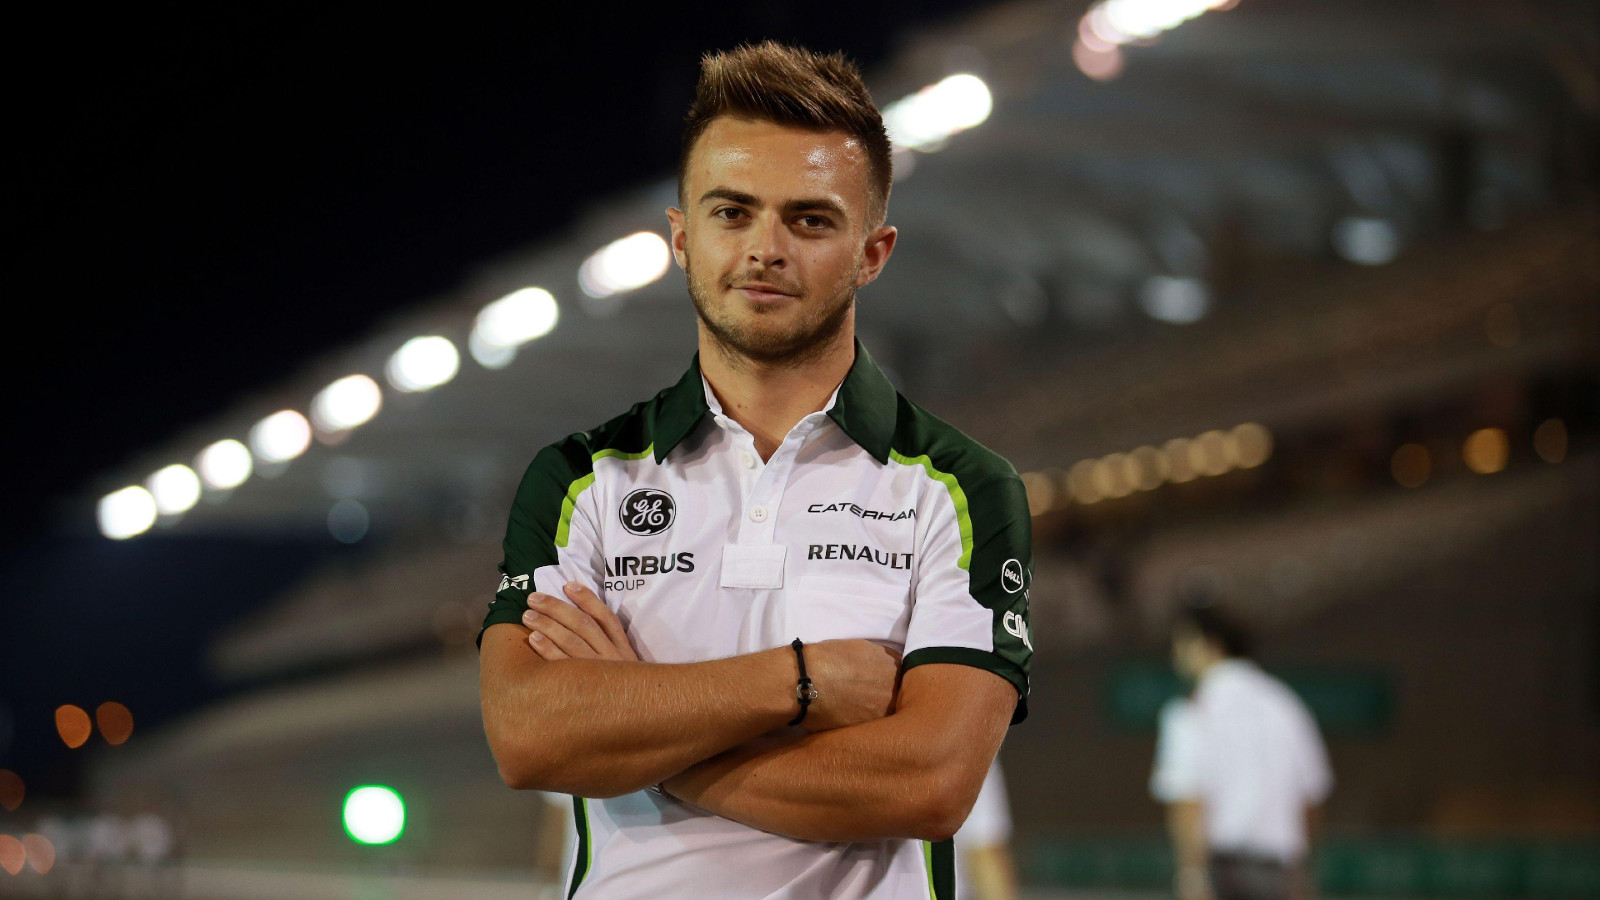 Will Stevens, pictured as a Caterham driver for the 2014 Abu Dhabi Grand Prix.